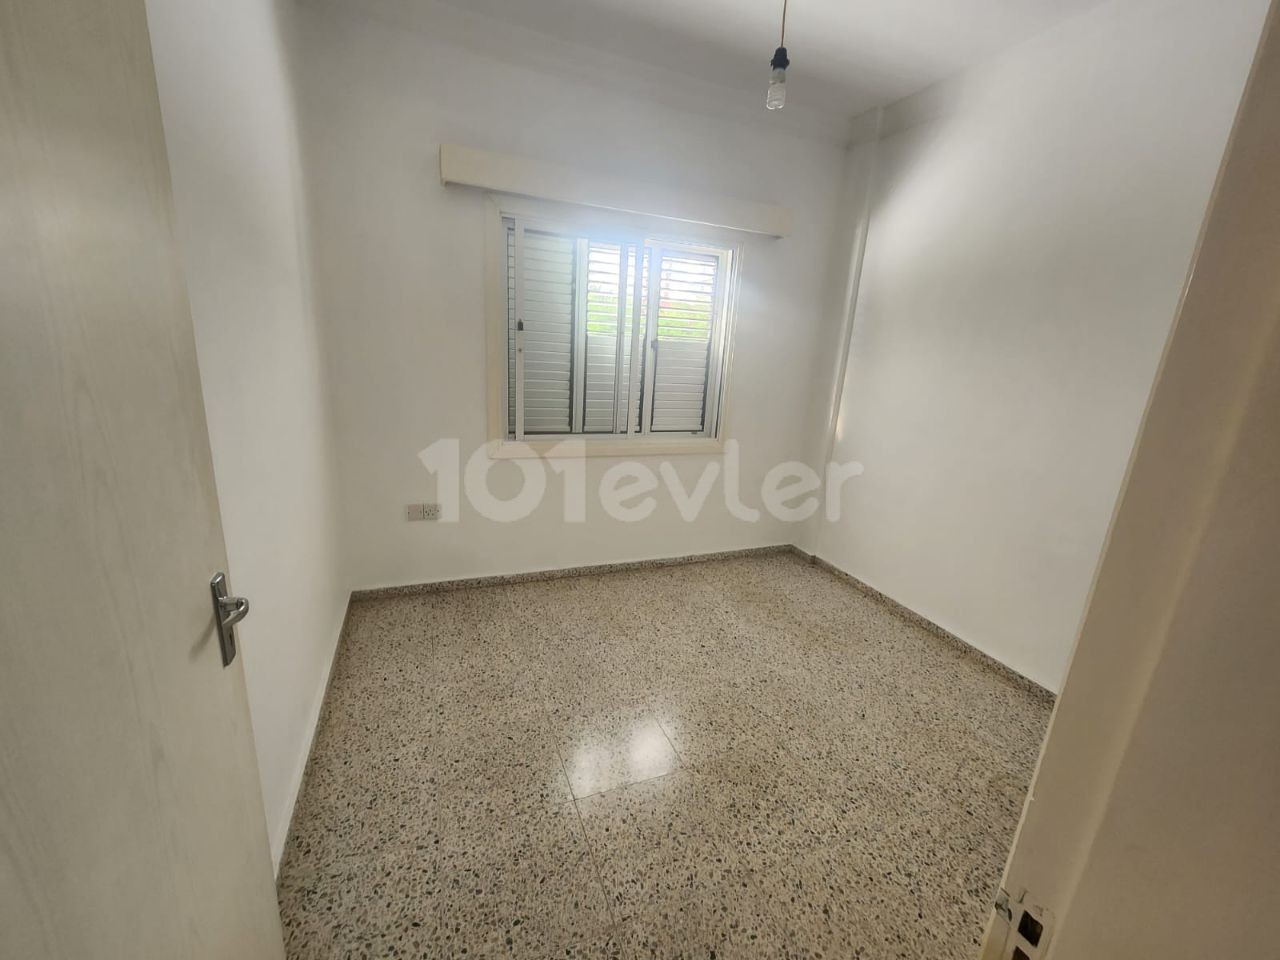 Ground floor flat for rent for commercial purposes in a wonderful location in Yenikent, Nicosia